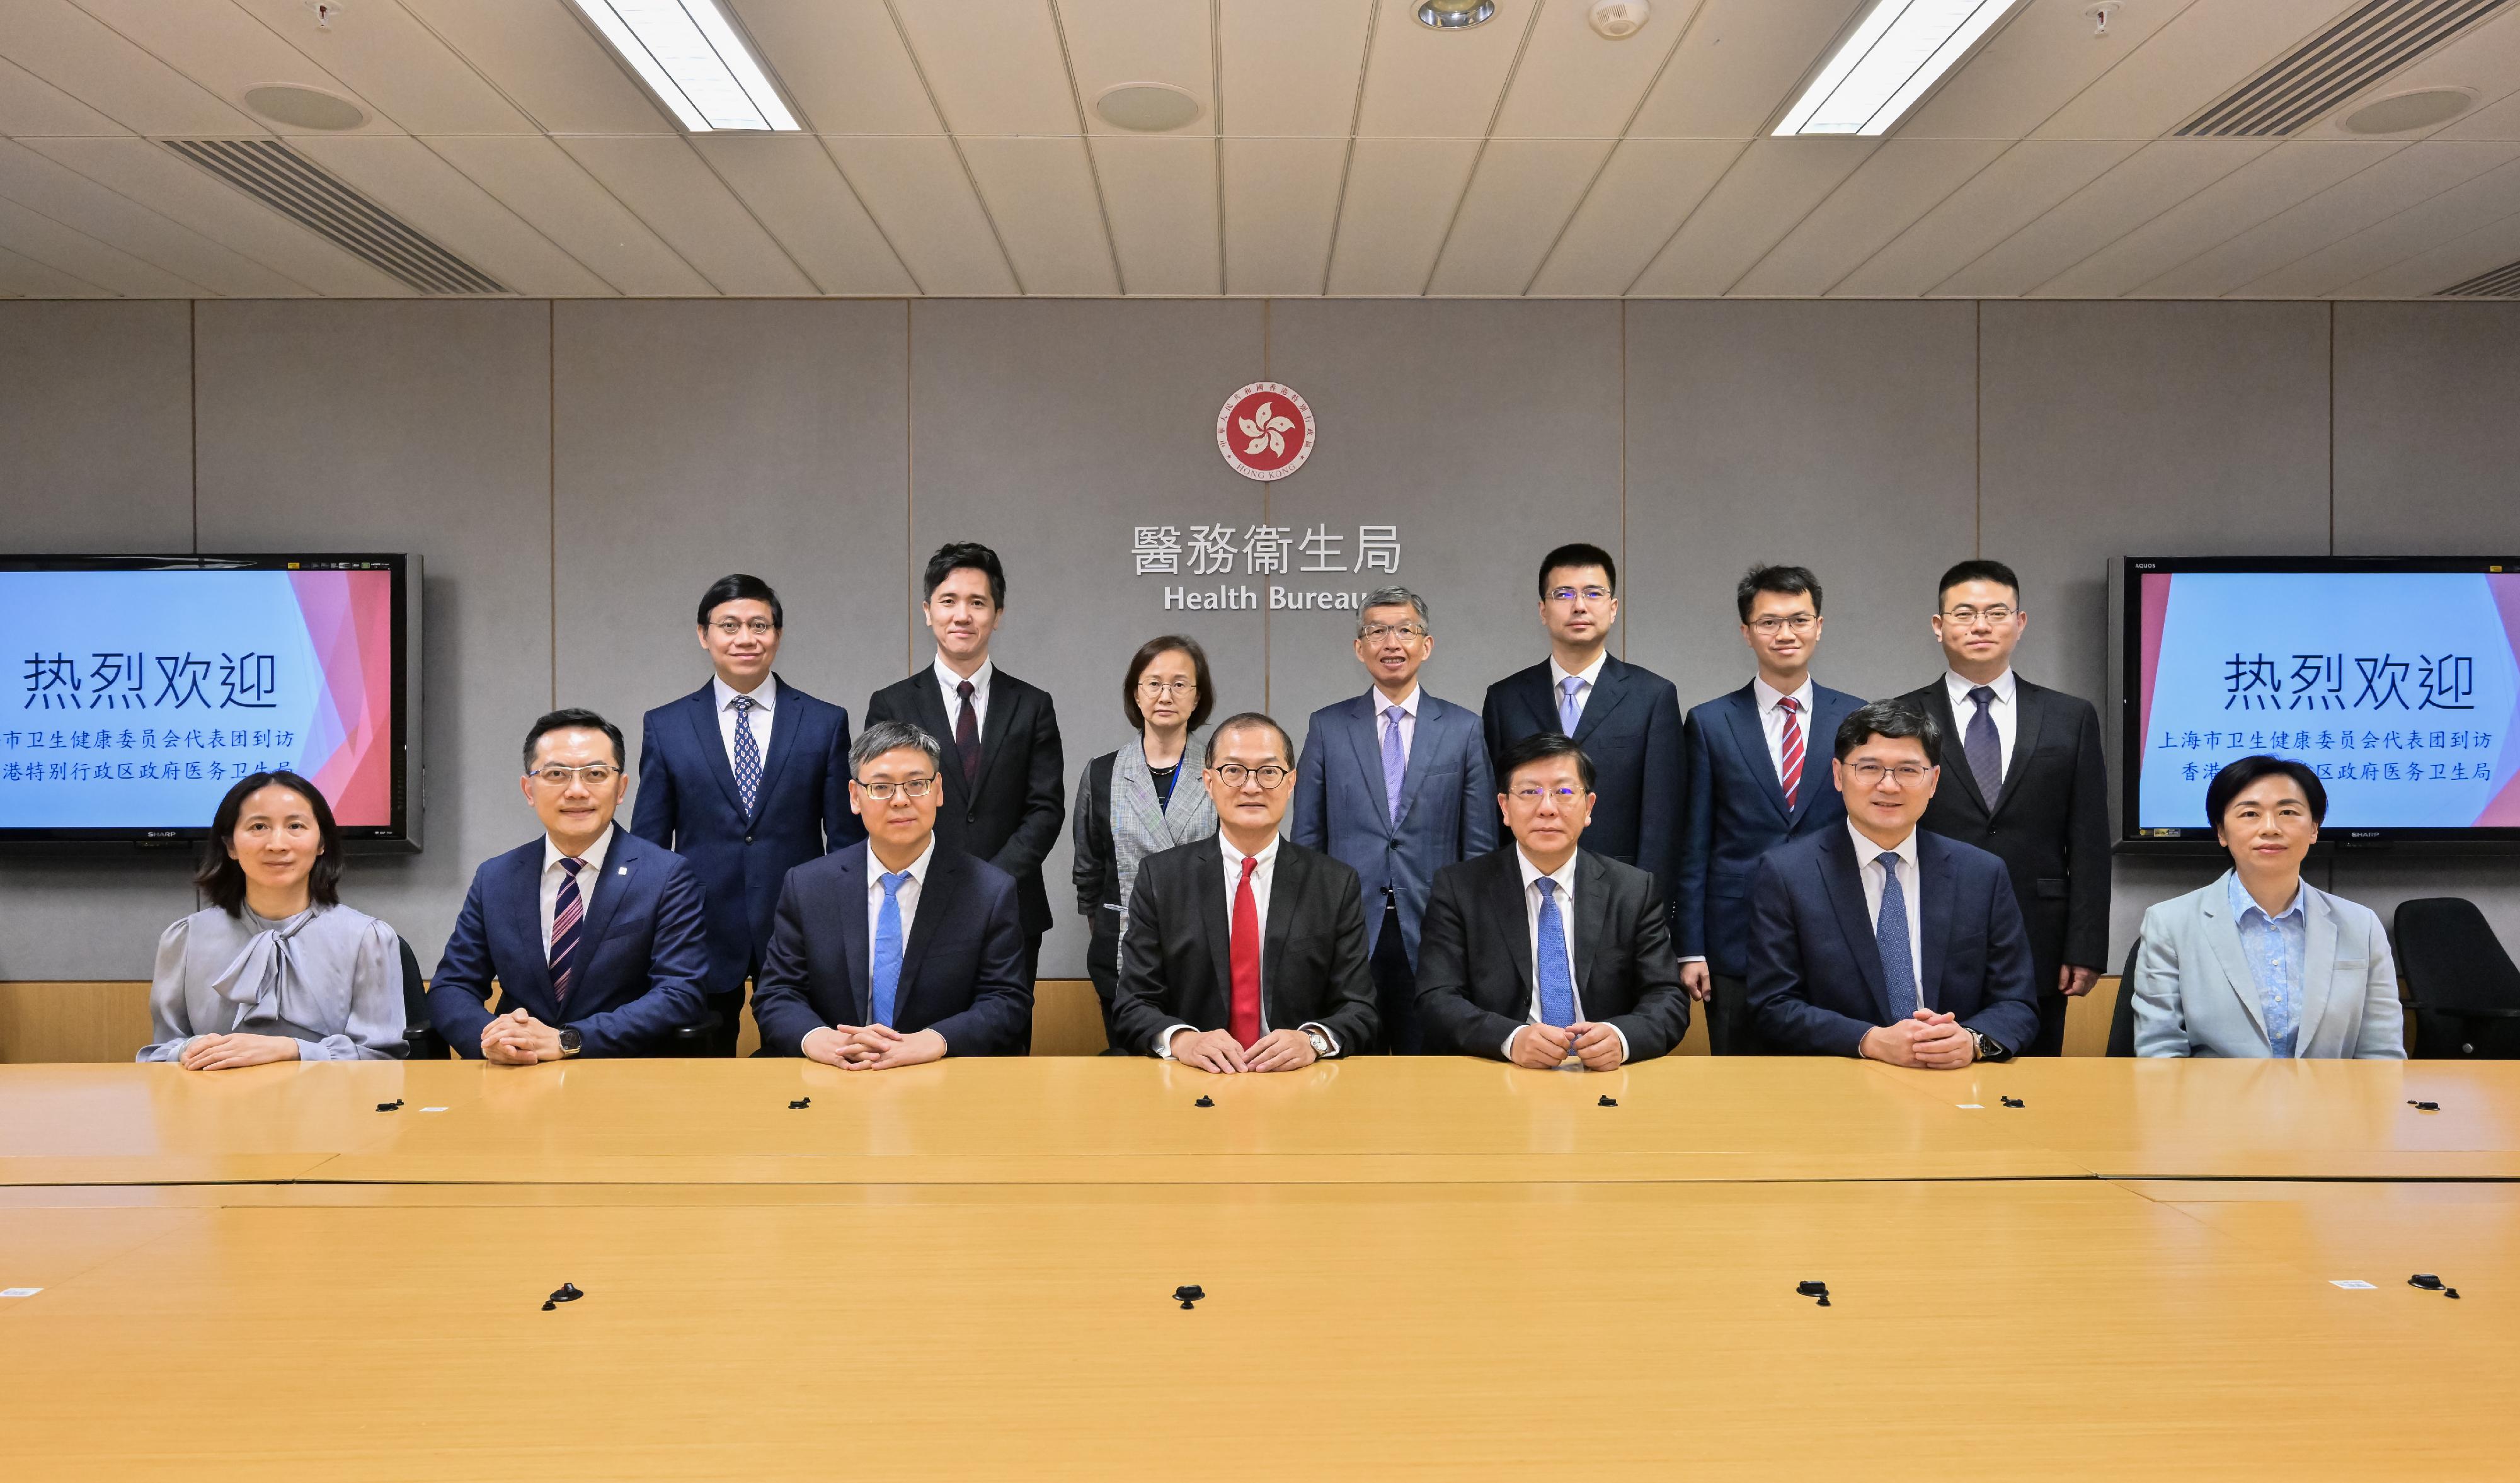 The Secretary for Health, Professor Lo Chung-mau, met with a delegation led by the Director General of the Shanghai Municipal Health Commission, Professor Wen Daxiang, today (April 26). Photo shows Professor Lo (front row, centre); Professor Wen (front row, third right); the Director of Health, Dr Ronald Lam (front row, second left); the Controller of Regulatory Affairs of the Department of Health, Dr Amy Chiu (back row, third left); the Chief Executive of the Hospital Authority (HA), Dr Tony Ko (front row, second right); the Director of Cluster Services of the HA, Dr Simon Tang (back row, fourth right), and other attendees of the meeting.